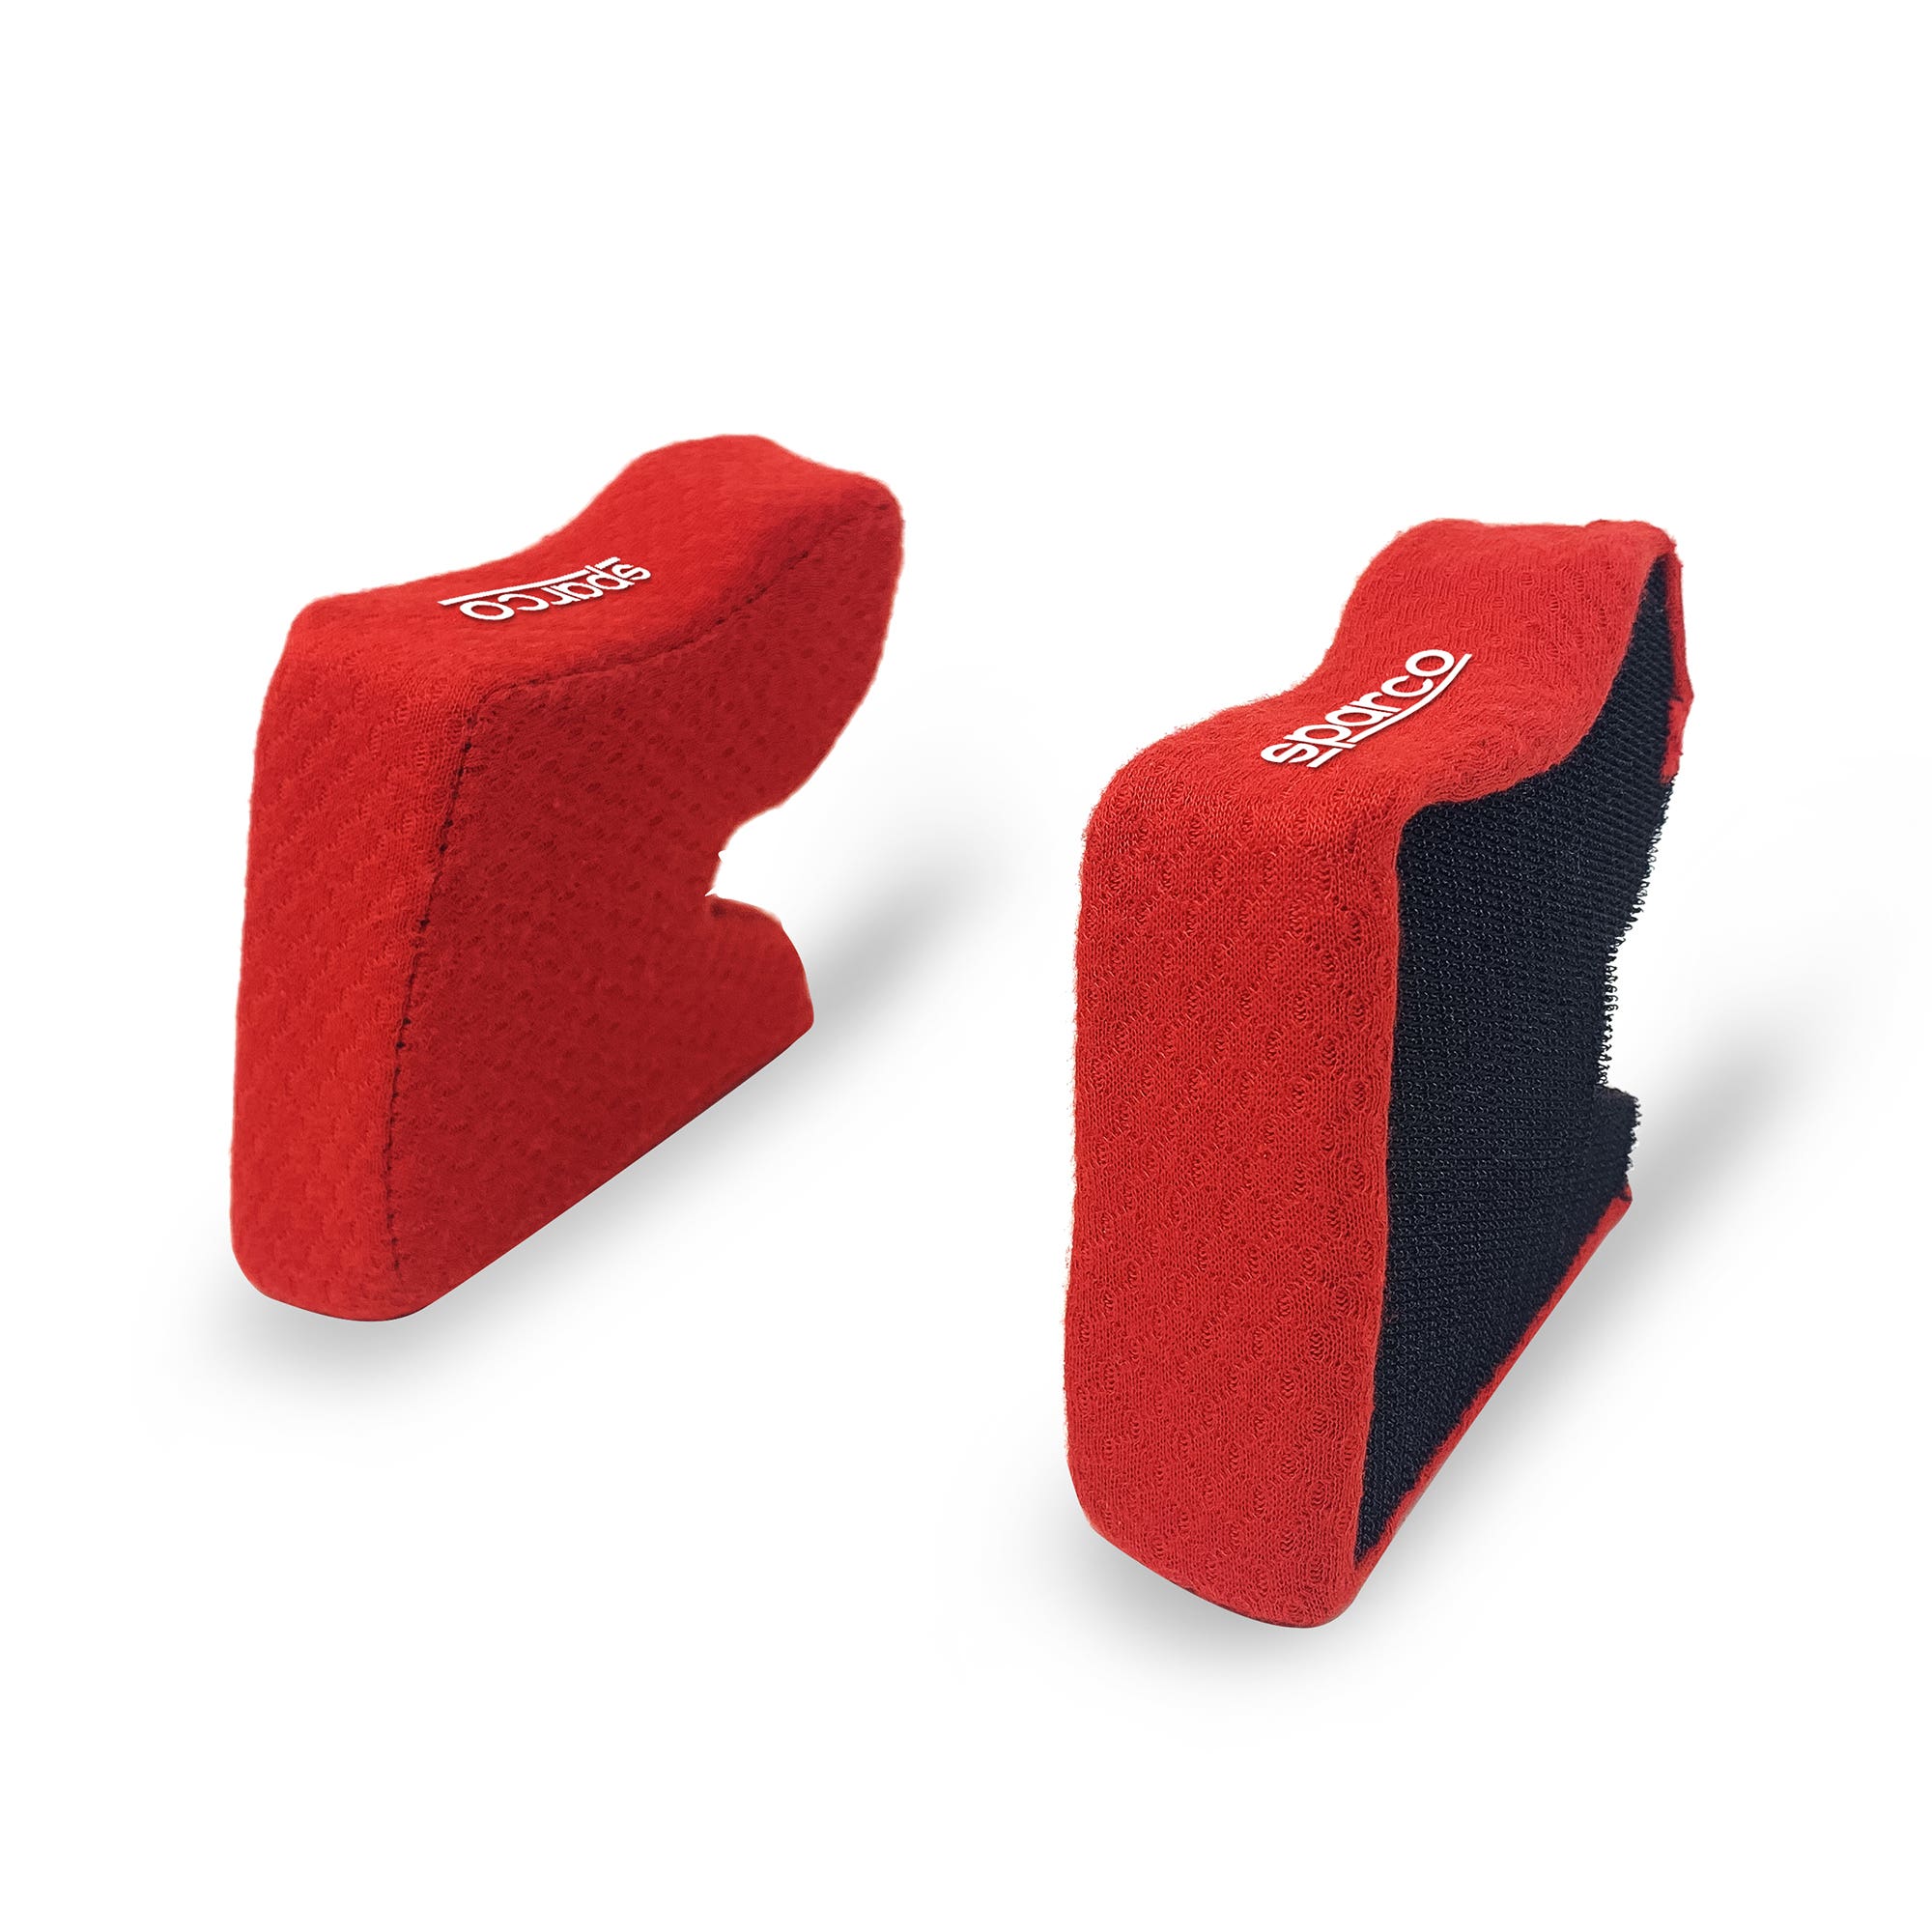 CHEEK PADDING FULL FACE RED - Sparco Shop